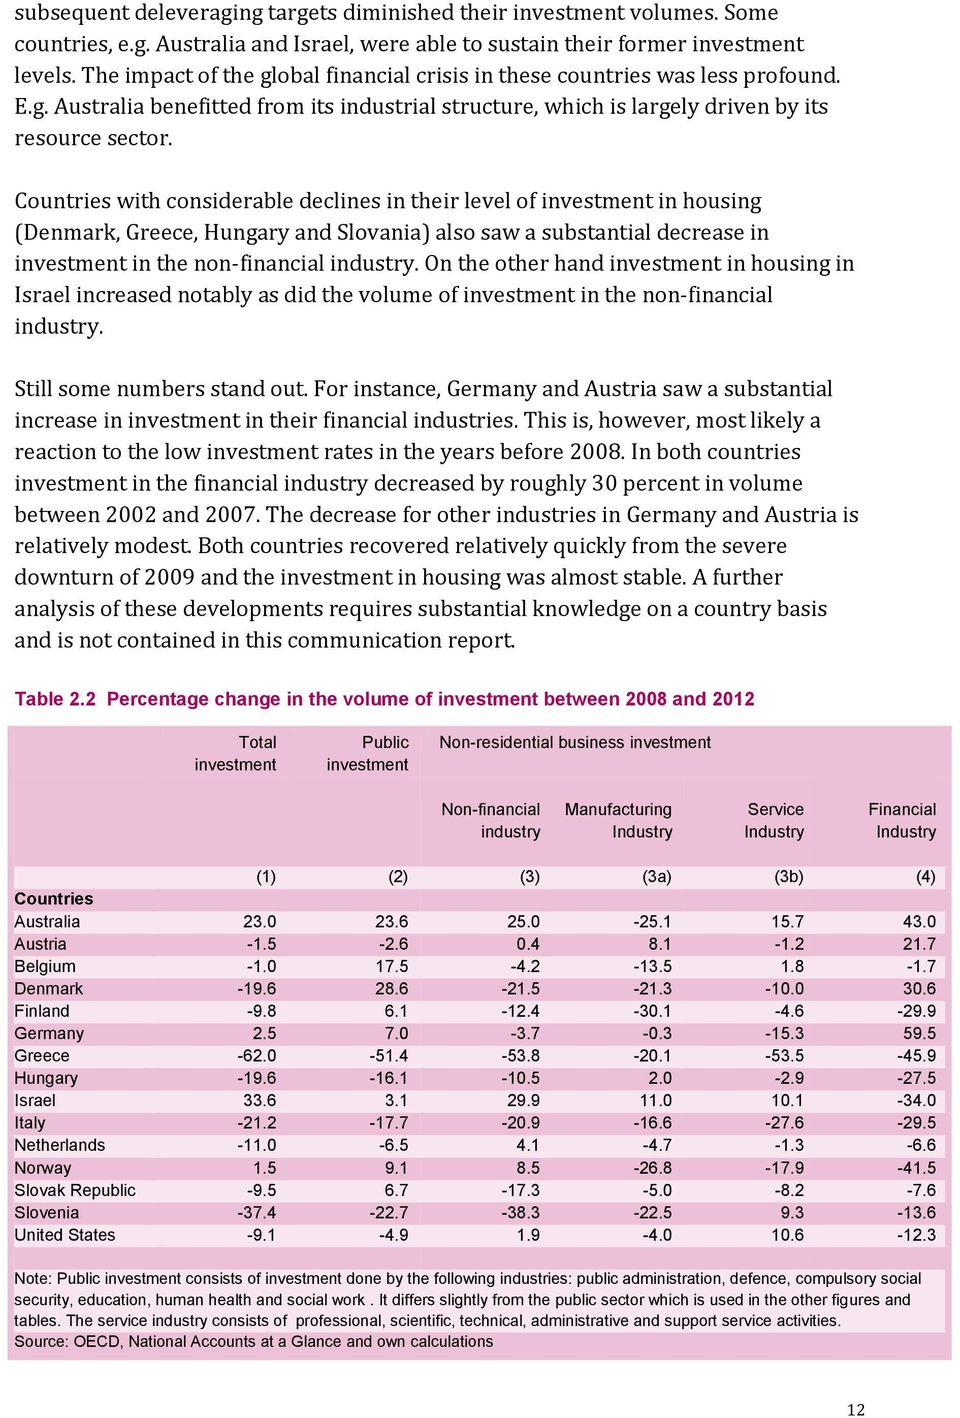 Countries with considerable declines in their level of investment in housing (Denmark, Greece, Hungary and Slovania) also saw a substantial decrease in investment in the non-financial industry.